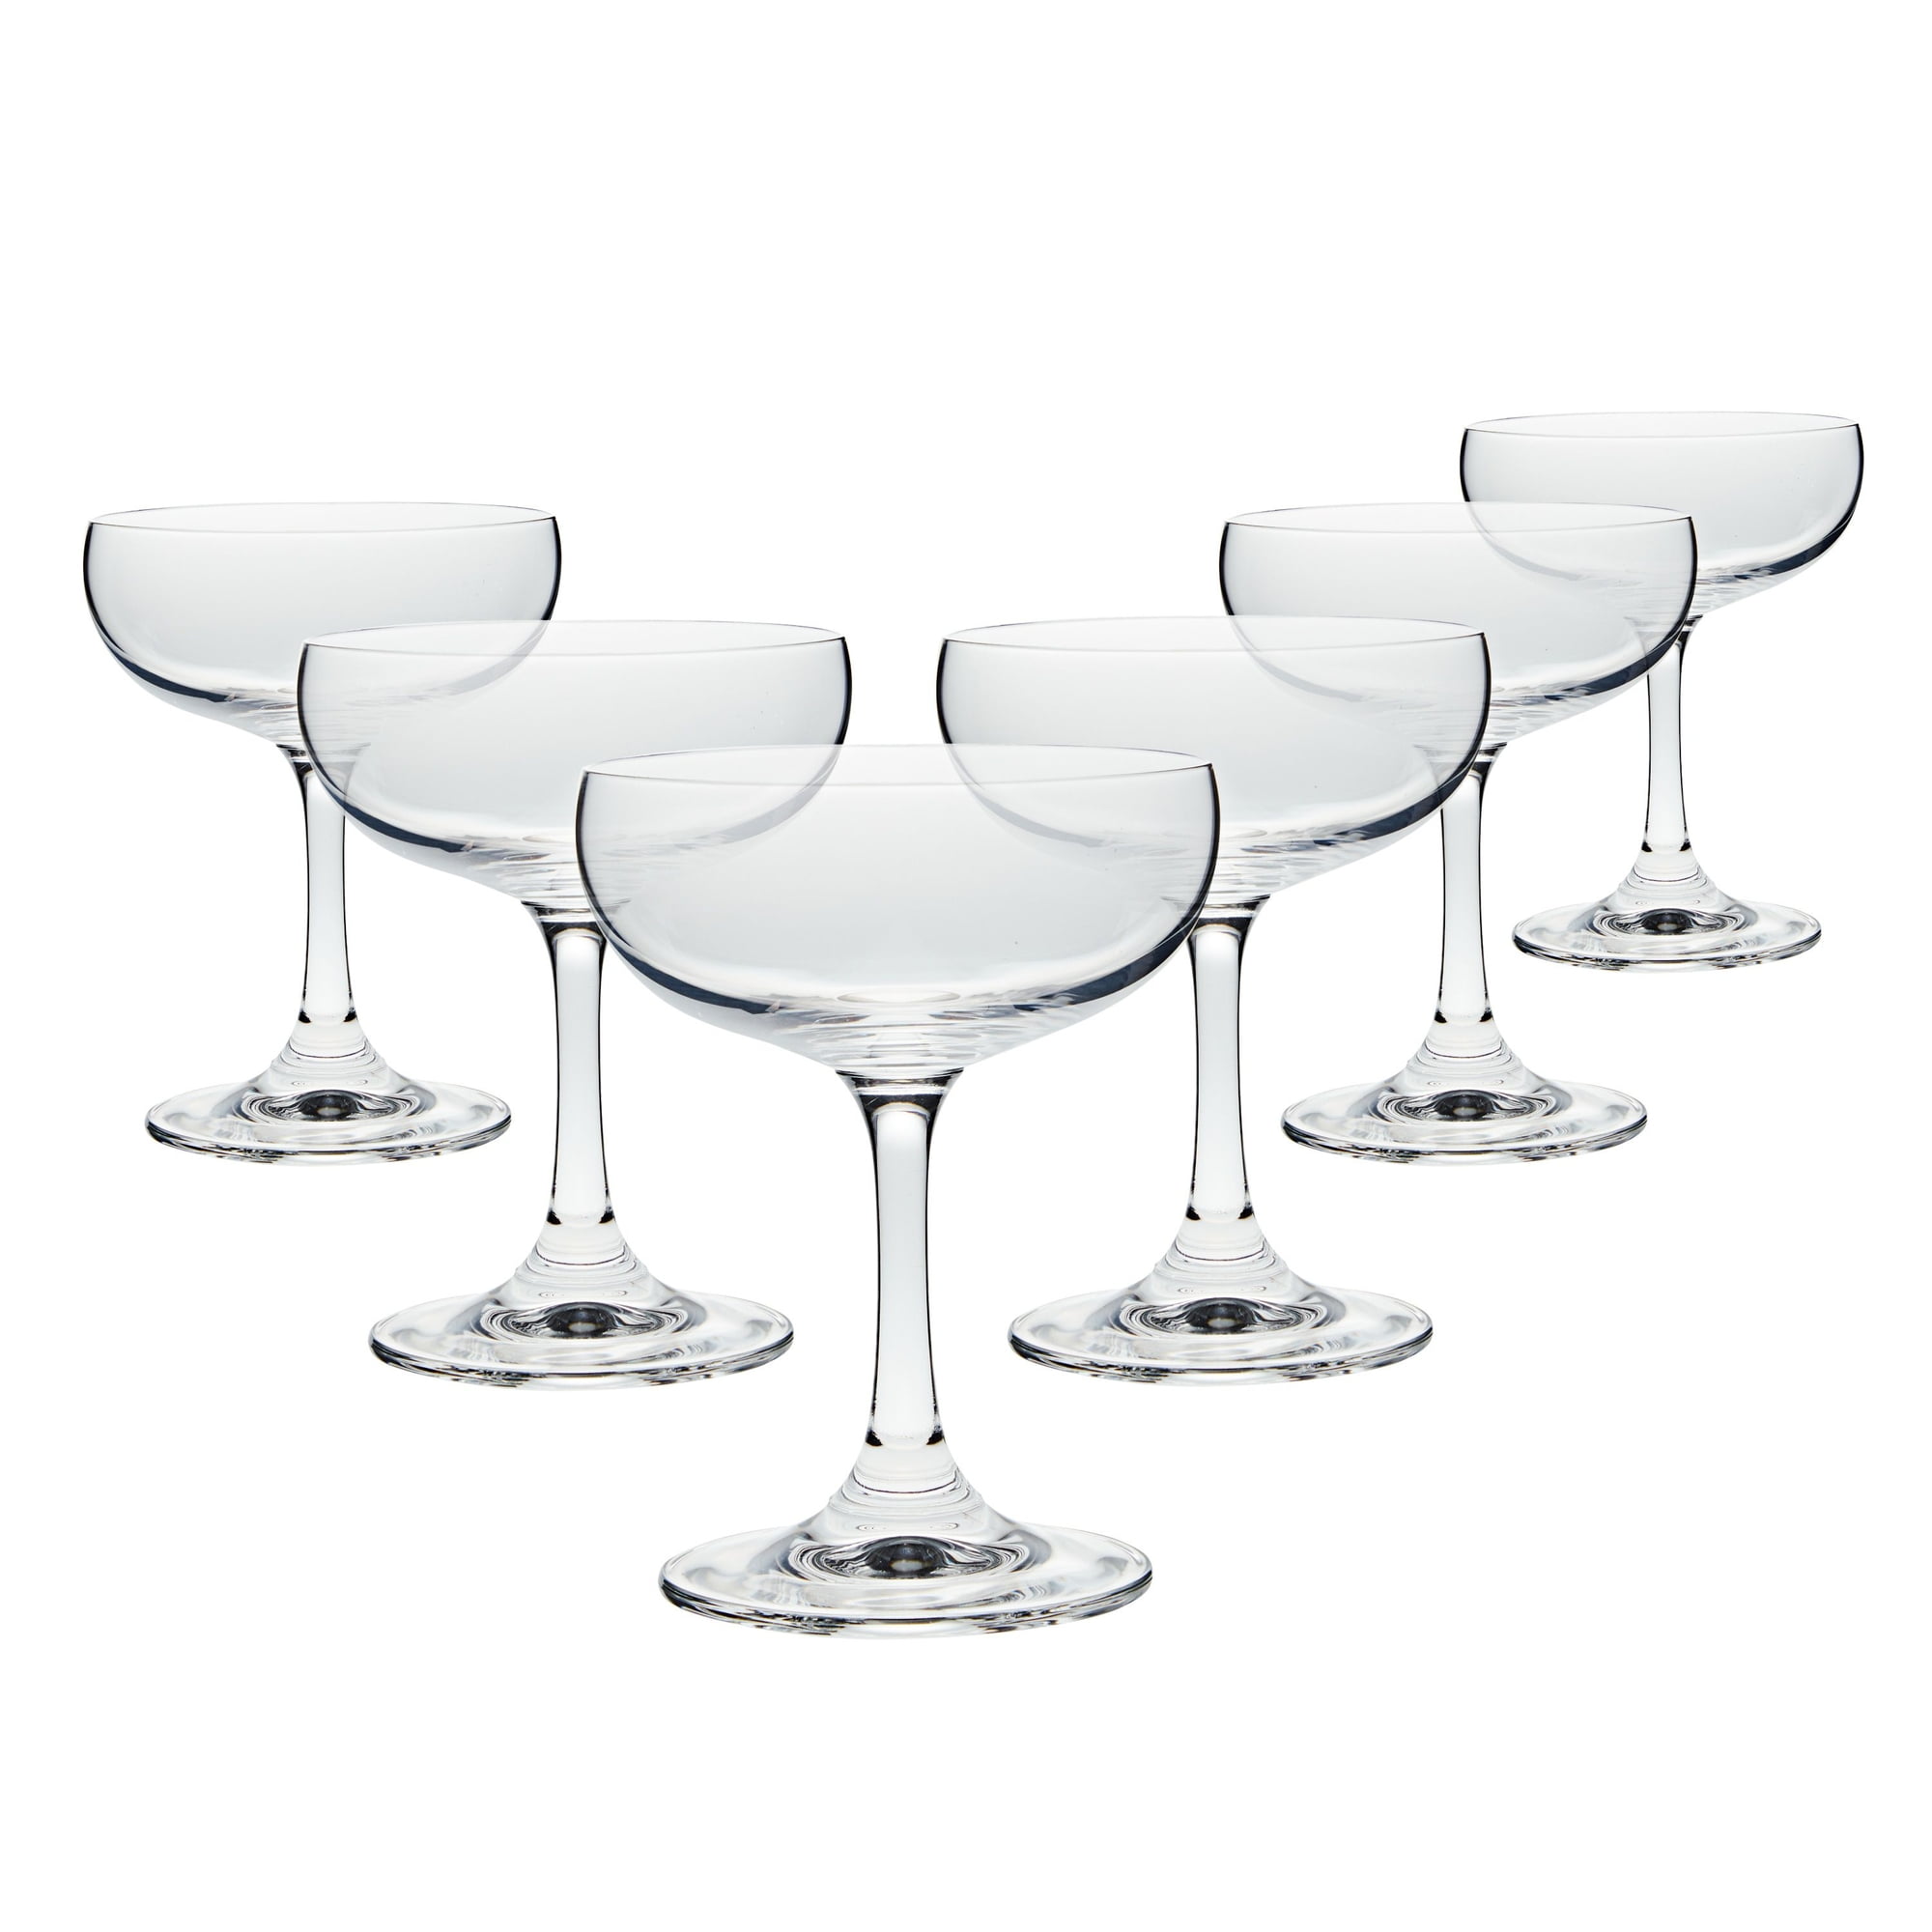 Weewooday Coupe Glasses 4.6 oz Champagne Glasses Bulk Cocktail Glasses Set  Gifts Martini Glasses Mar…See more Weewooday Coupe Glasses 4.6 oz Champagne